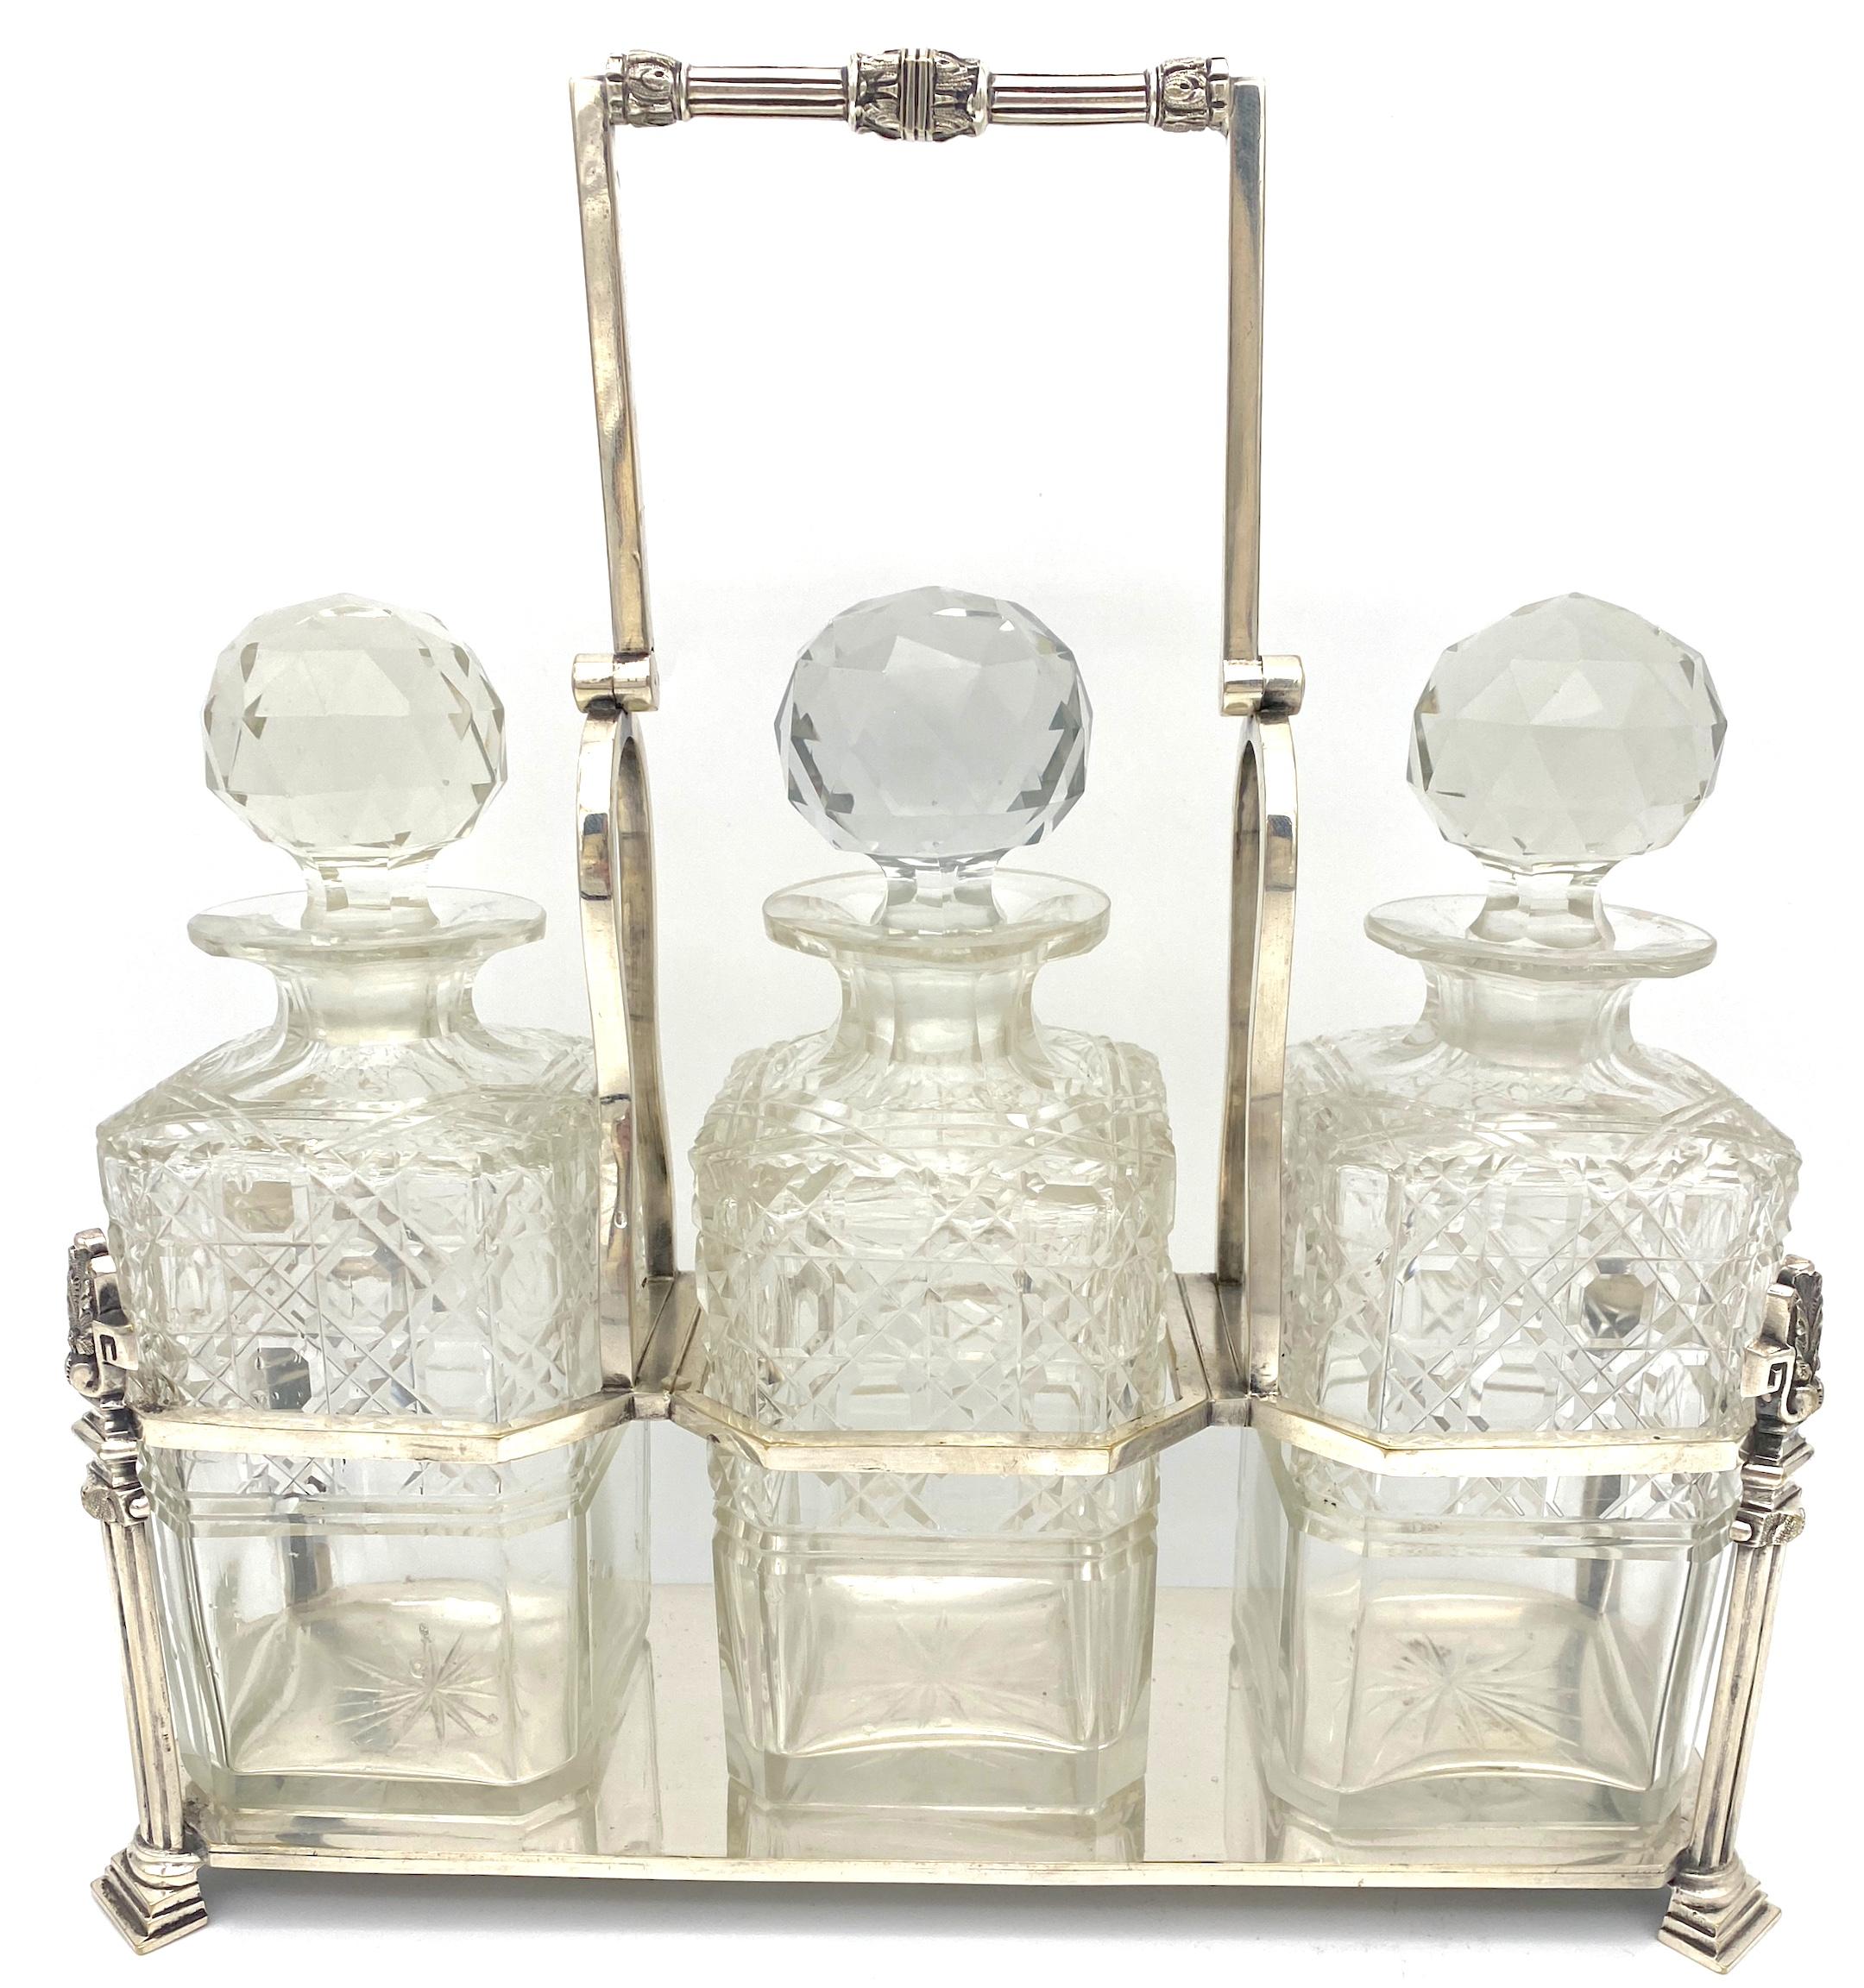 Antique English Silverplated Neoclassical Three Cut Glass Decanter/ Tauntless  
England, Circa 1890s

Presenting an exquisite Antique English Silverplated Neoclassical Three Cut Glass Decanter Decanter Set/Tauntless, originating from the 1890s in